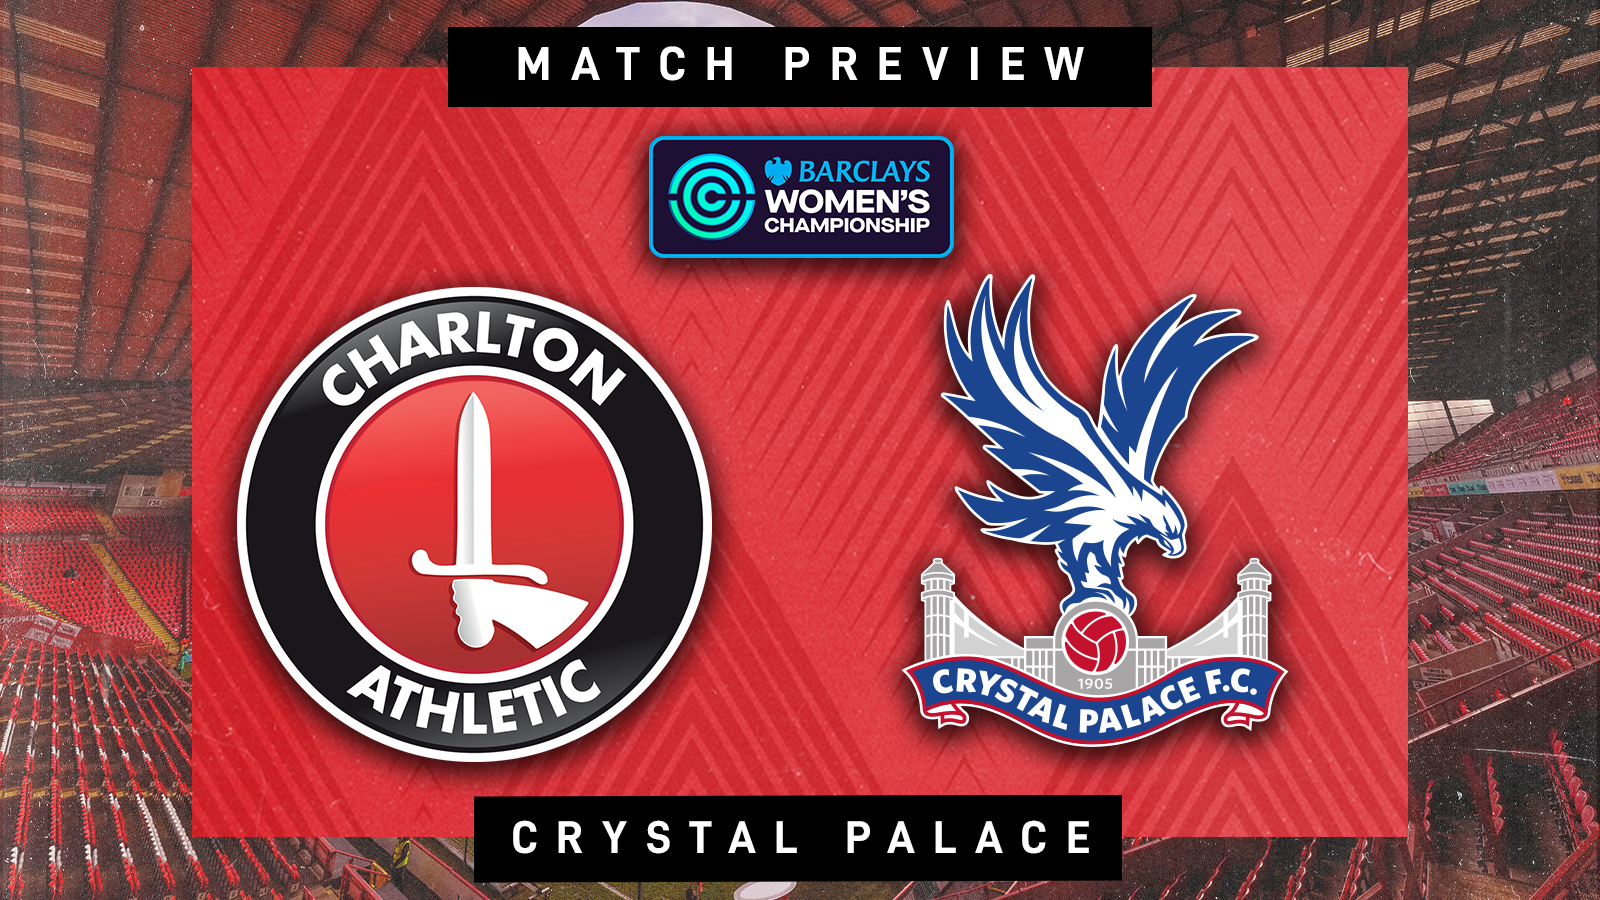 MATCH PREVIEW | Charlton v Crystal Palace 